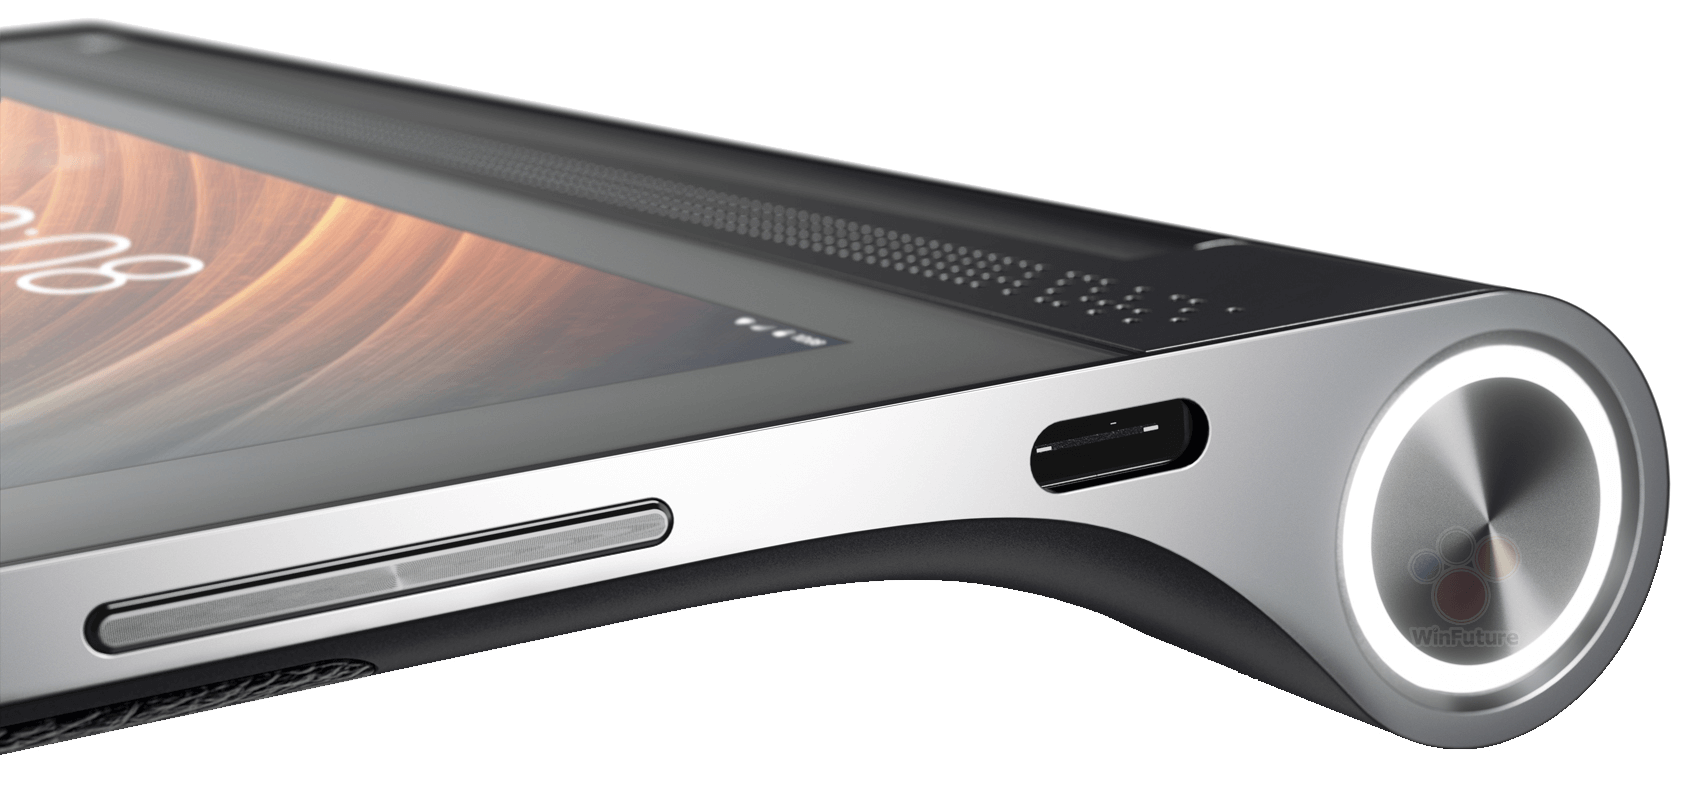 The Lenovo Yoga Tab 13 is on the way in 2021, according to new leaks